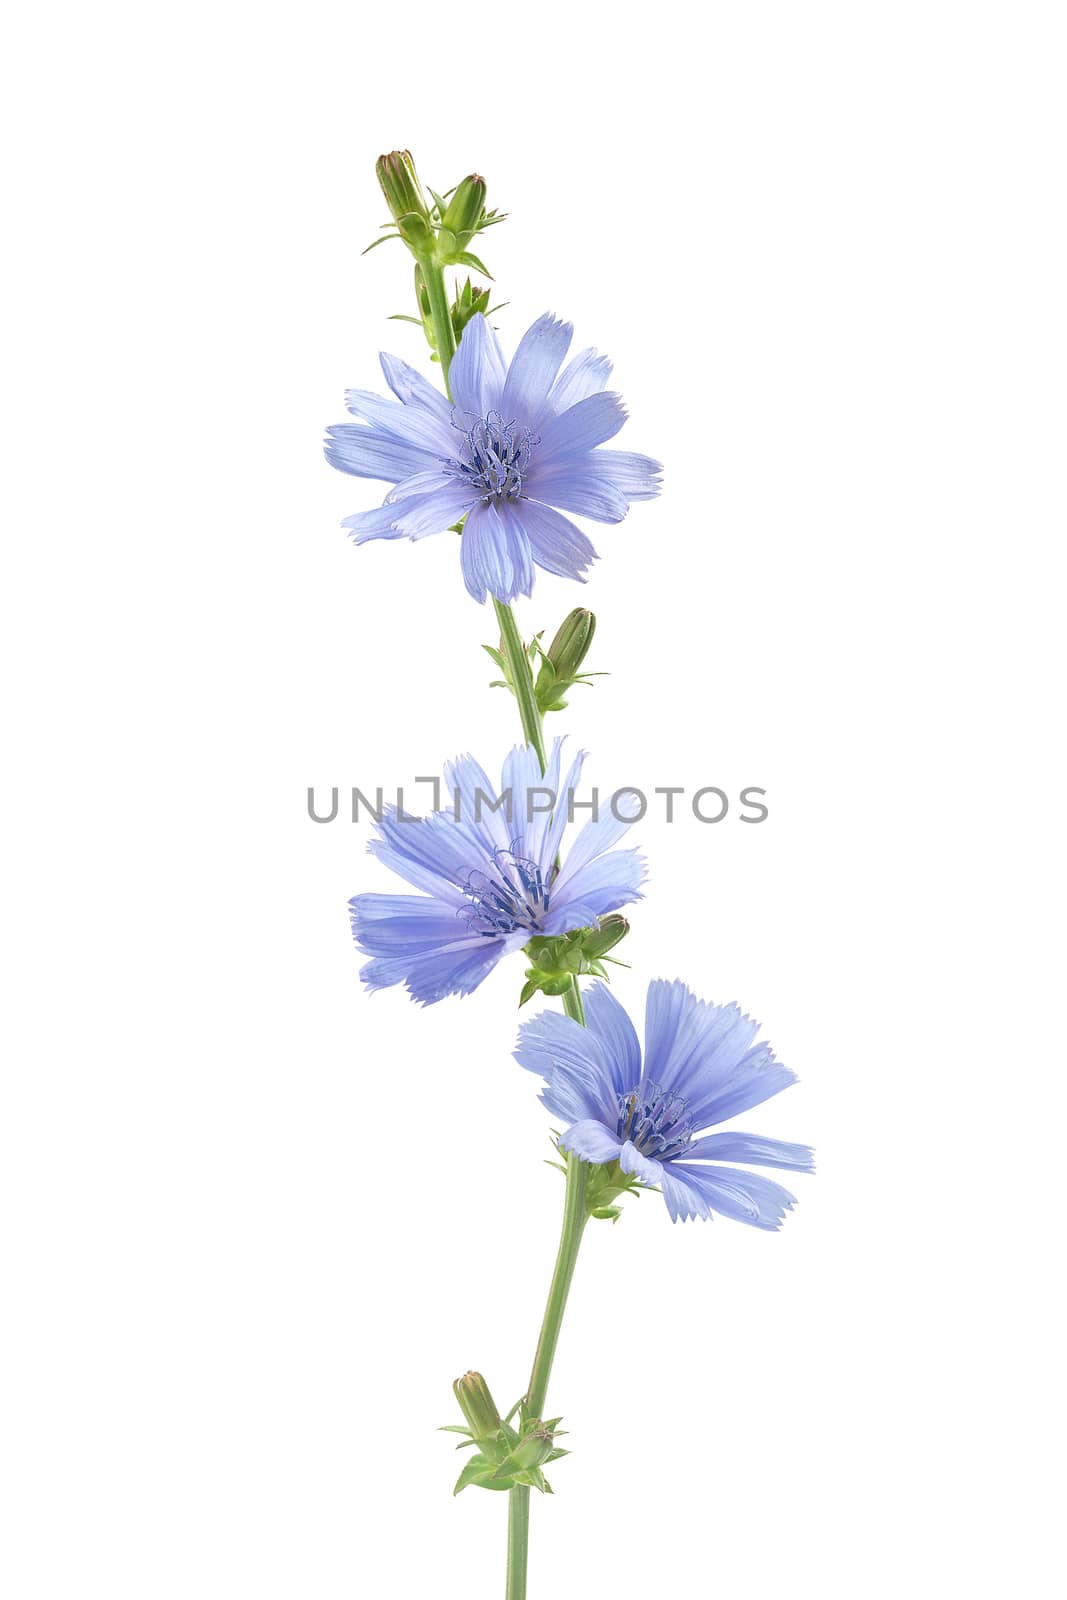 Isolated chicory branch with flowers on the white background